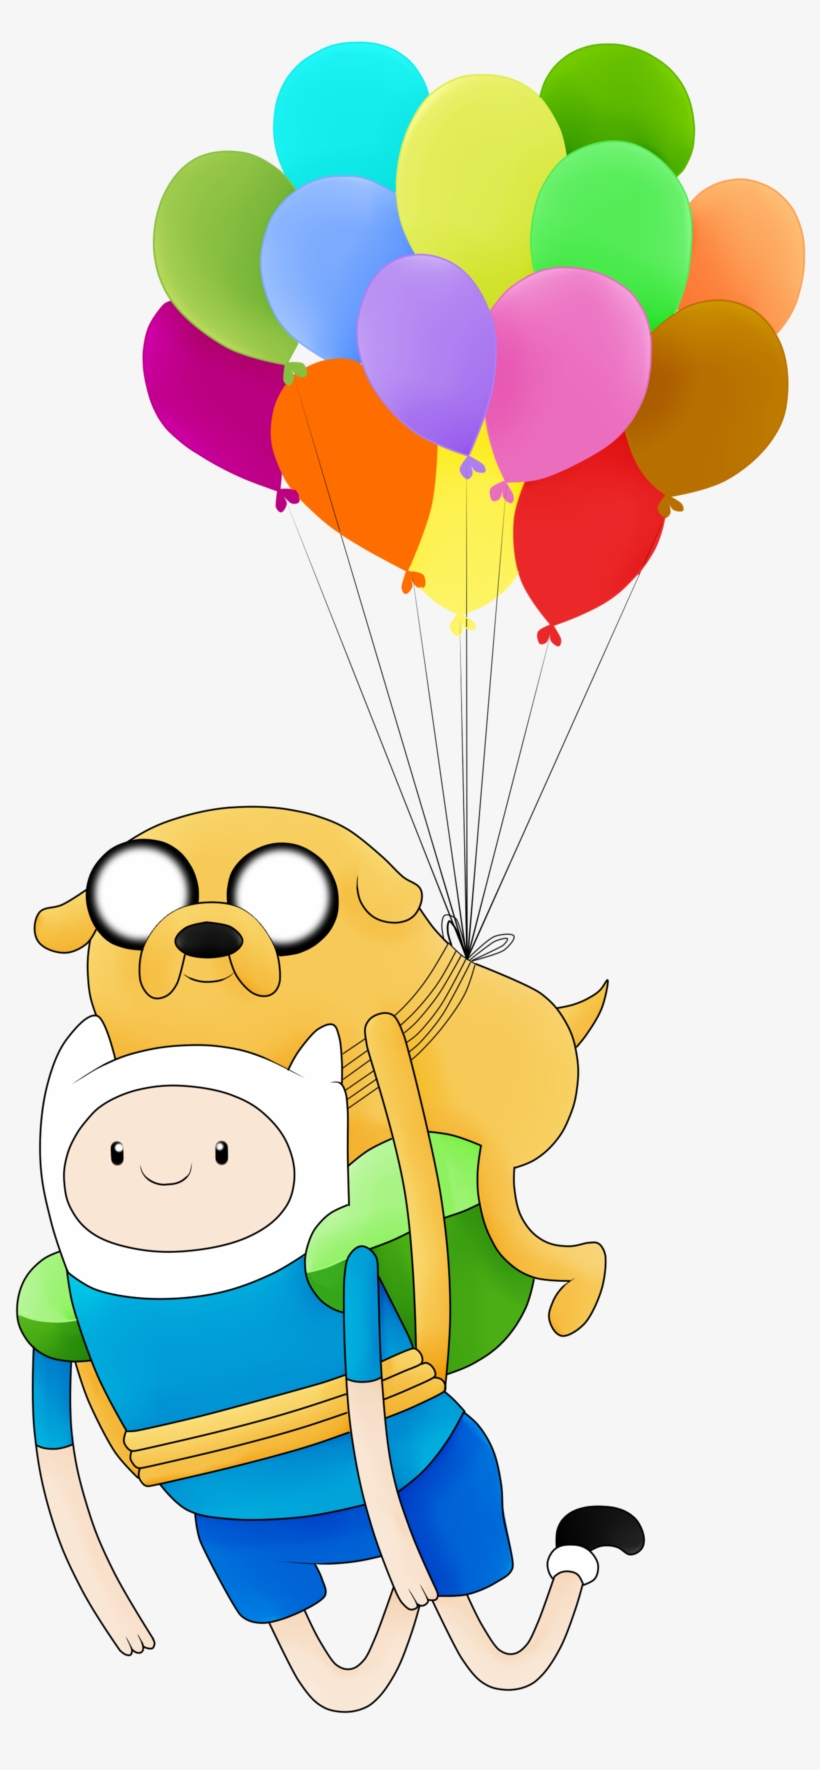 Jake the dog aestethic wallpaper | Adventure time iphone wallpaper,  Adventure time wallpaper, Cute cartoon wallpapers